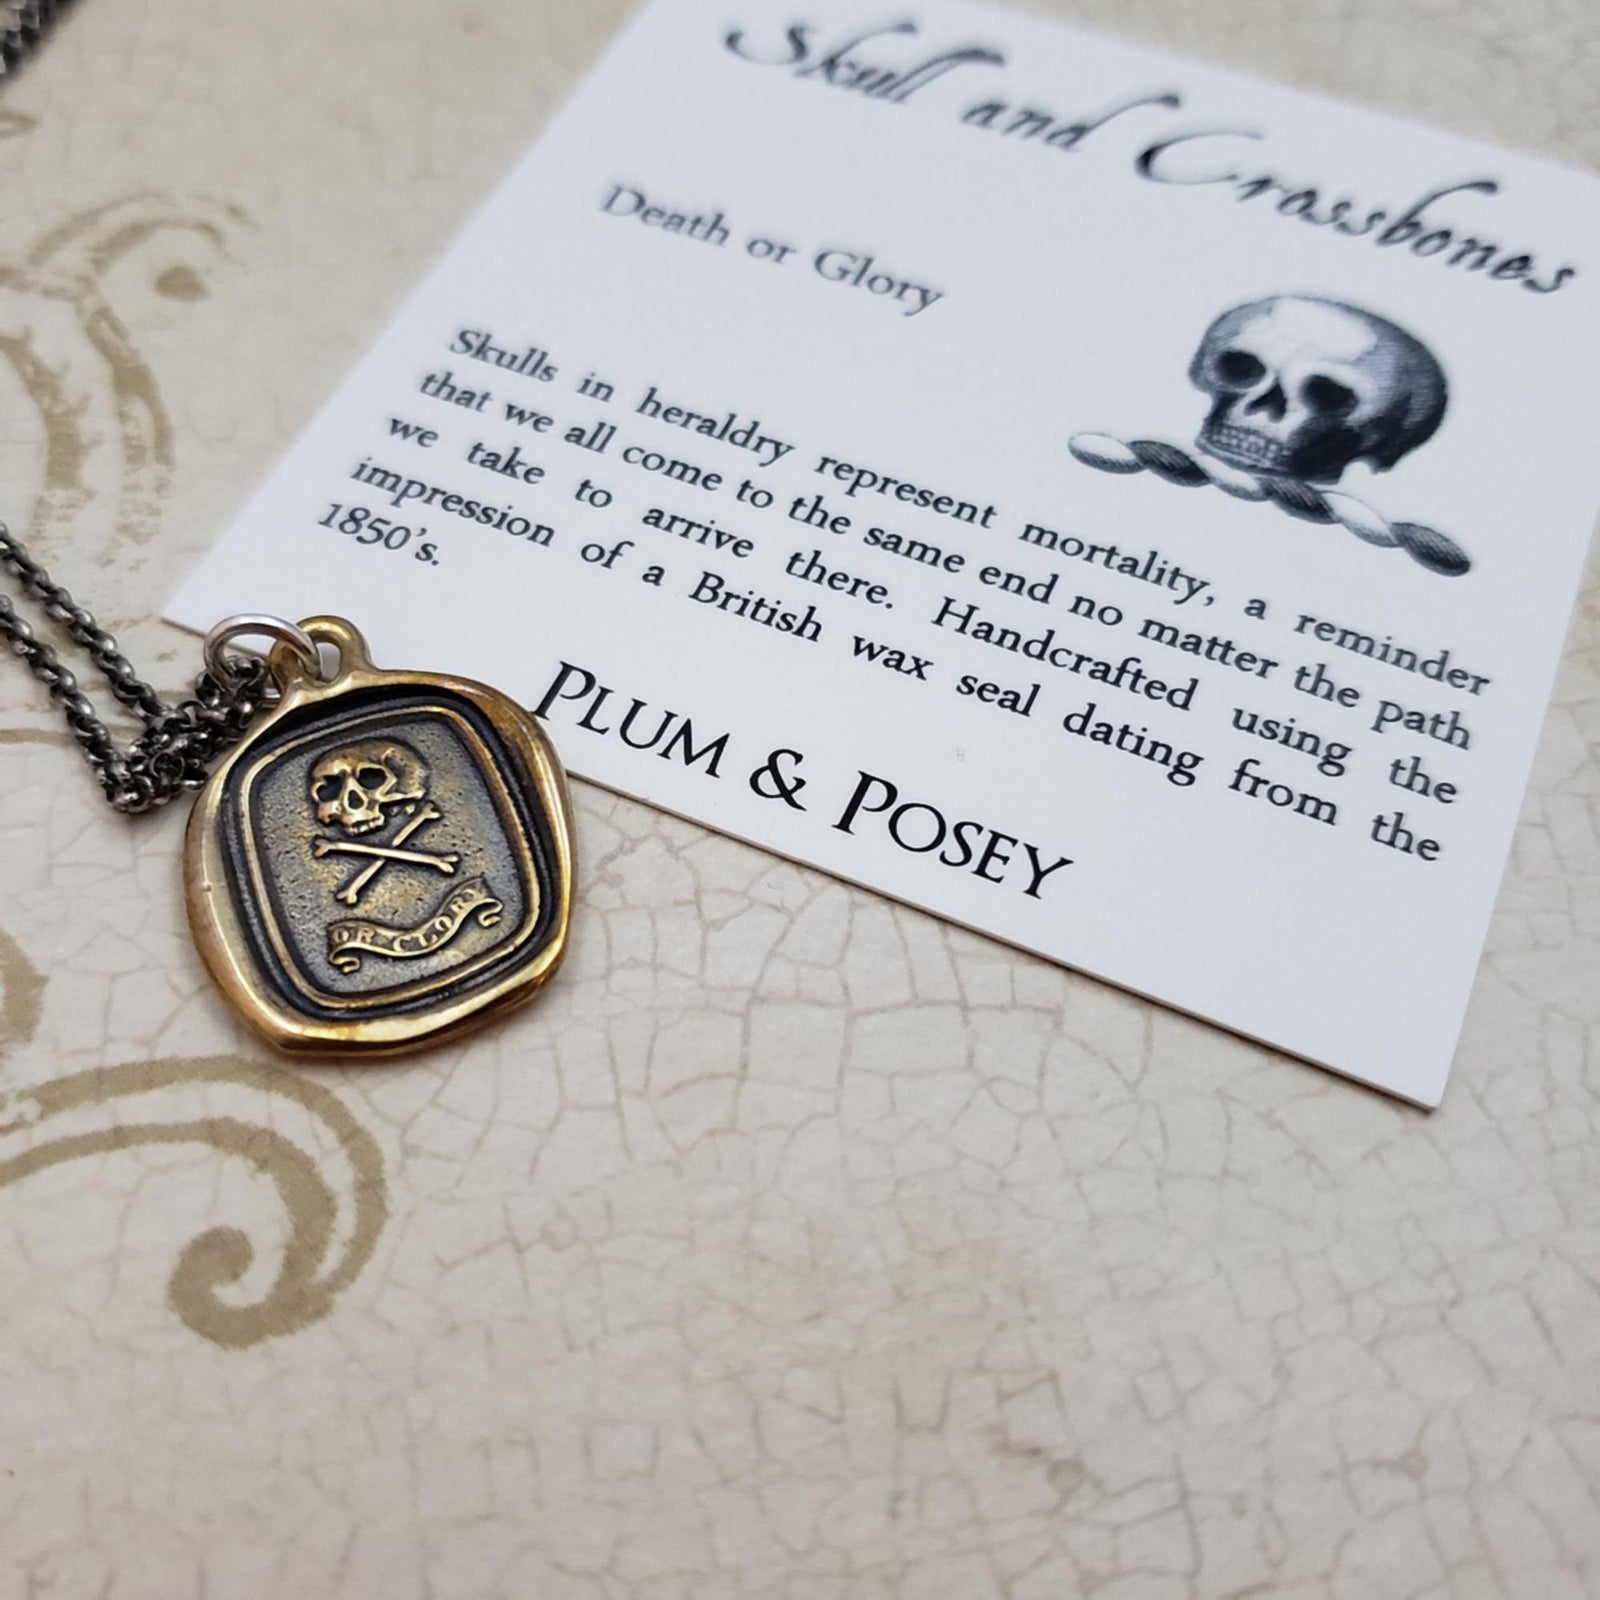 Skull & Crossbones 'I do not fear your heart' necklace in Gold